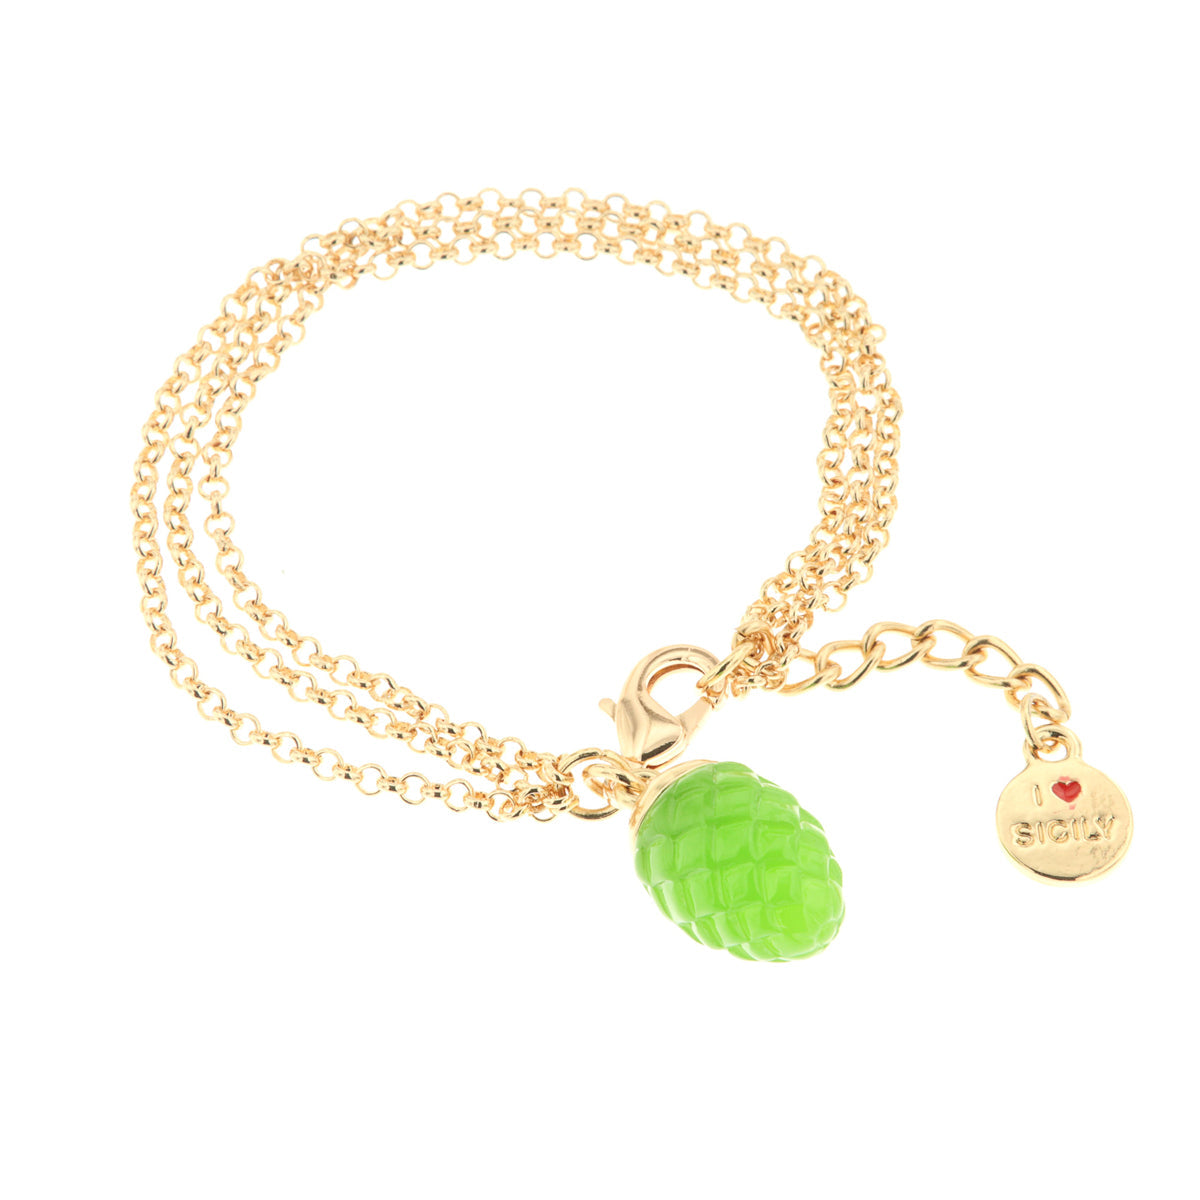 Metal bracelet with green charming pine -shaped pendant